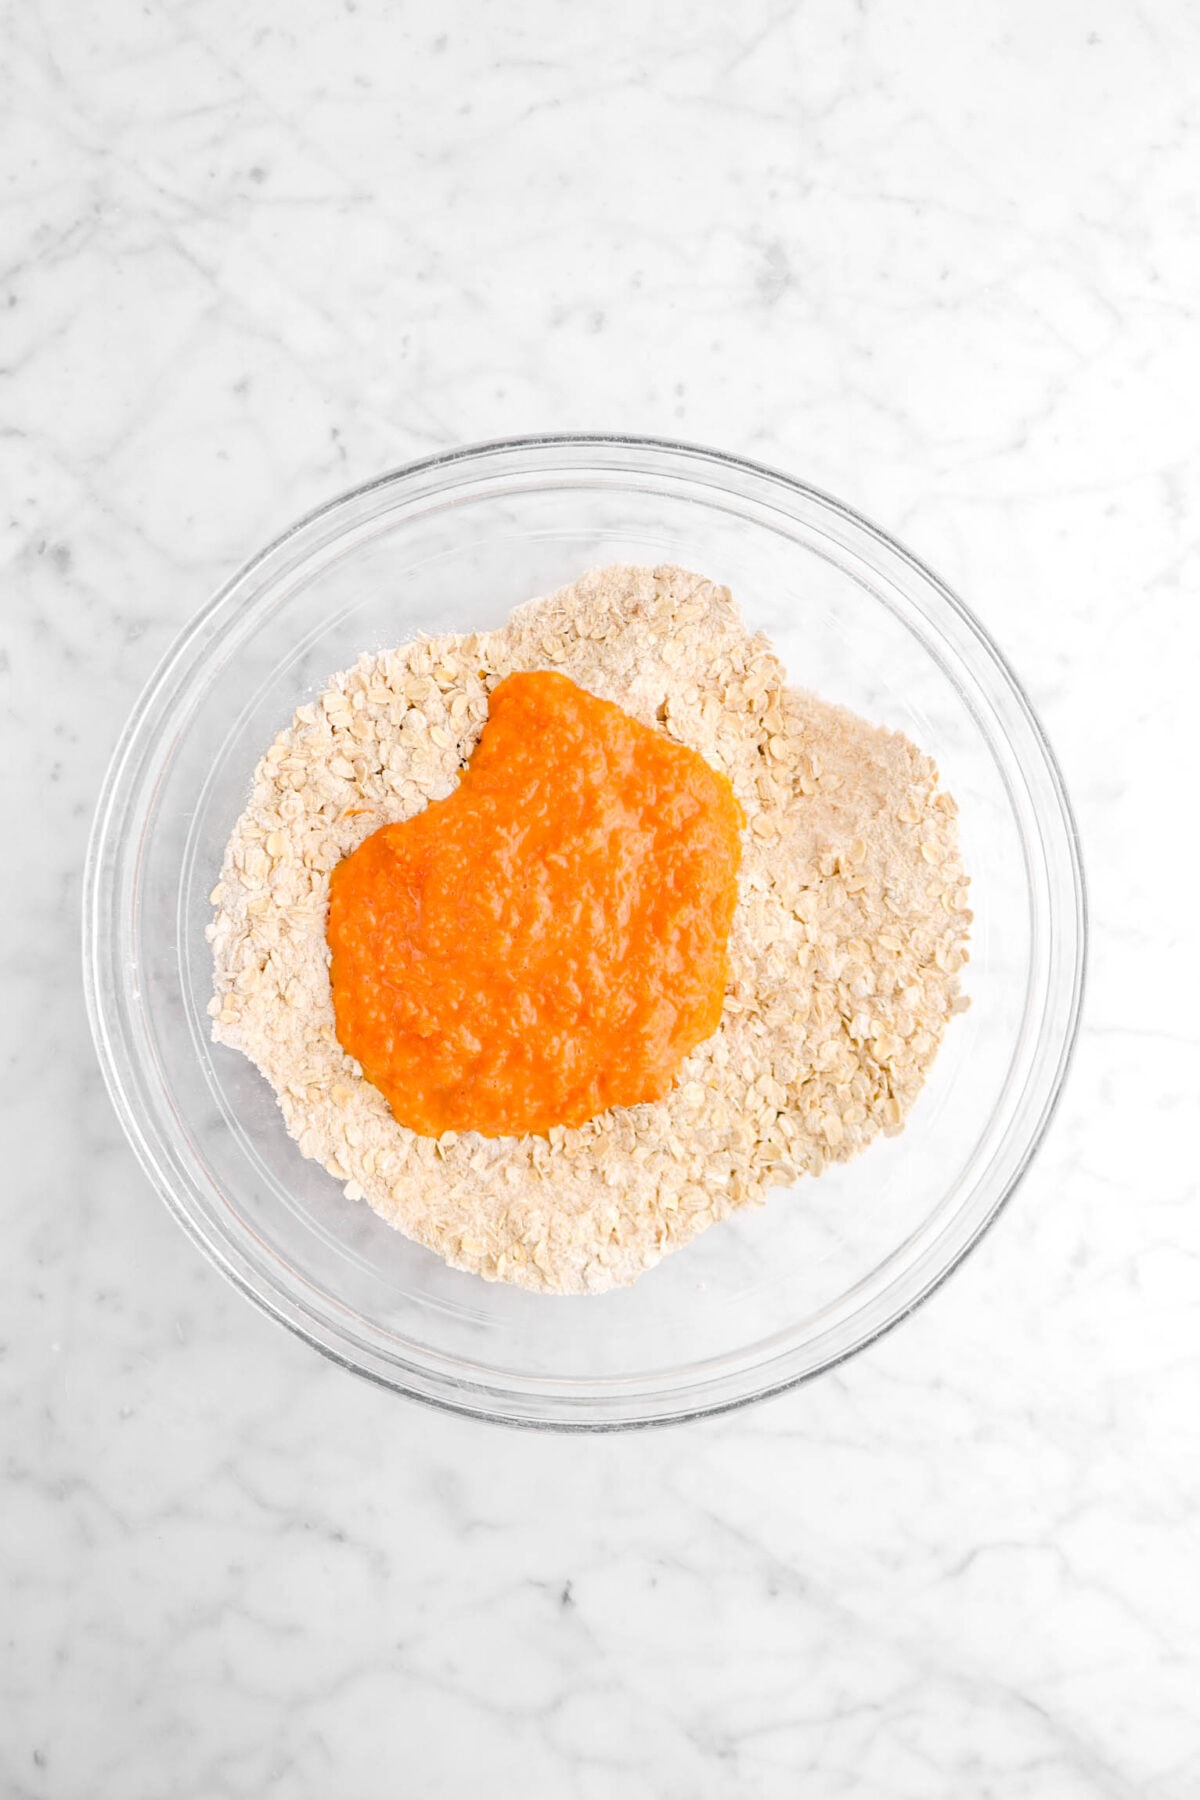 carrot mixture added to dry ingredients